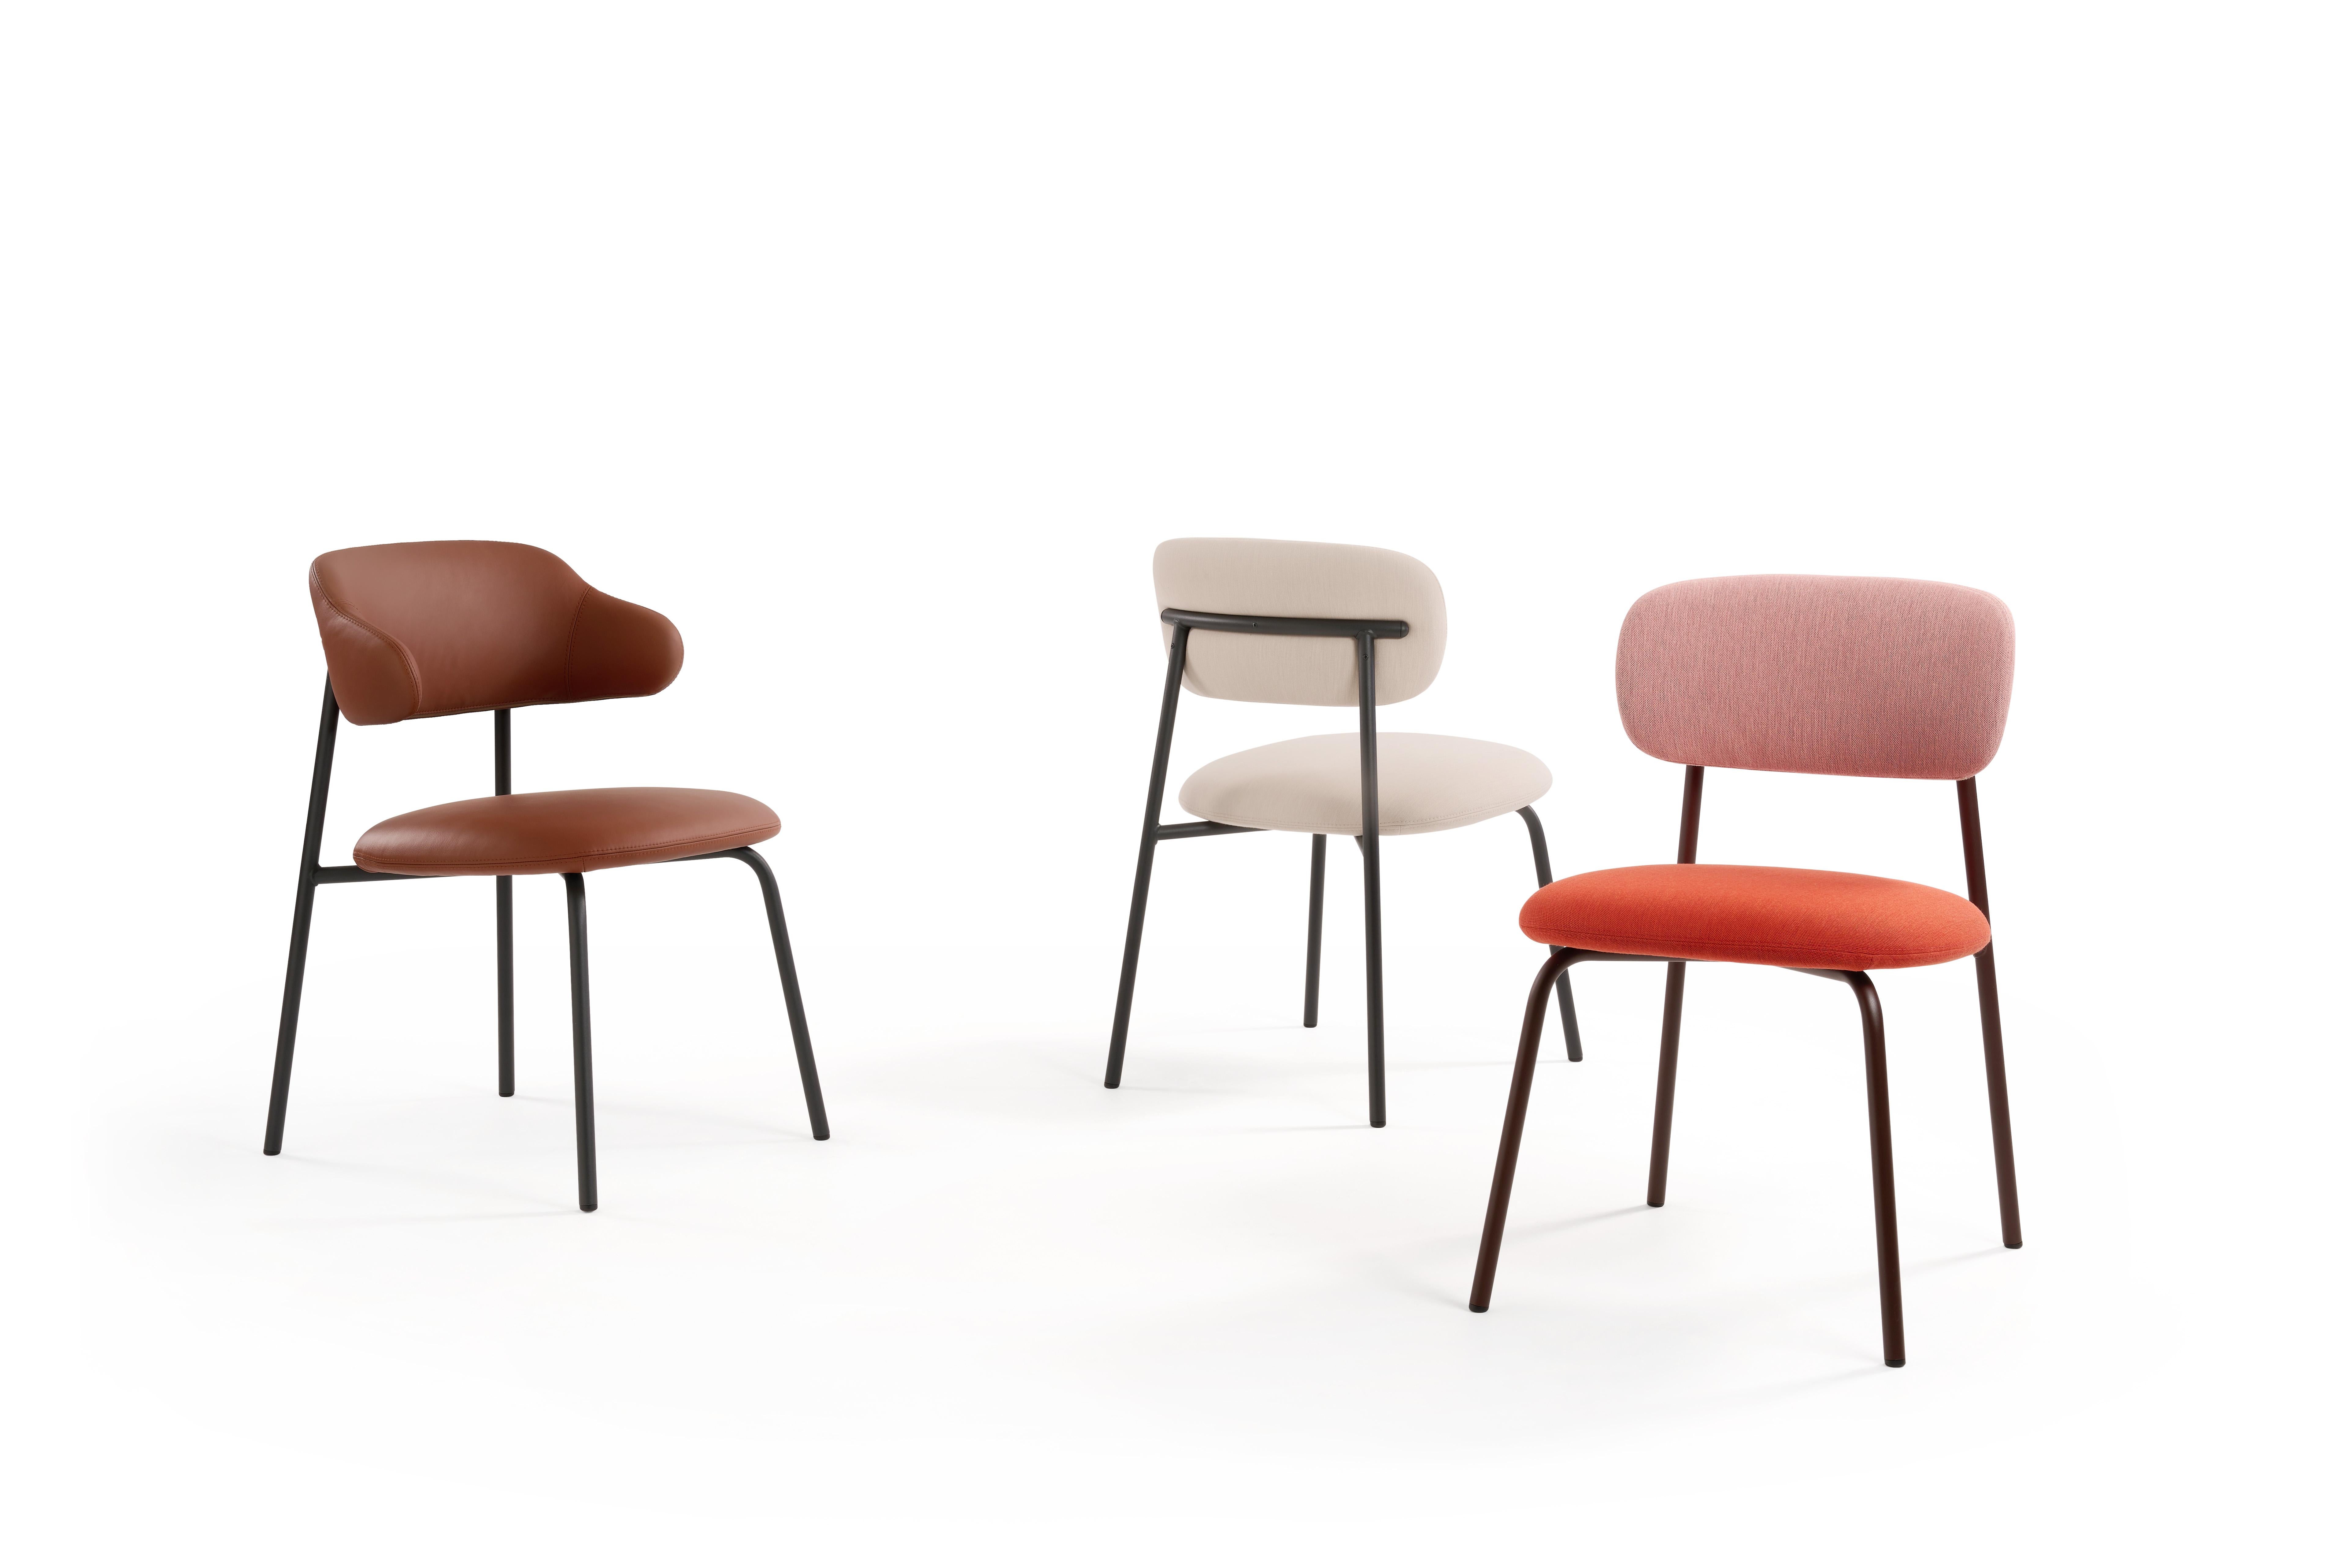 Lightness redefined. Aloa is a simple and elegant family of chairs and bar stools with an upholstered seat and back, supported by a graphic metal frame. Highly comfortable, Aloa fits perfectly around a dining table, at a restaurant or a meeting